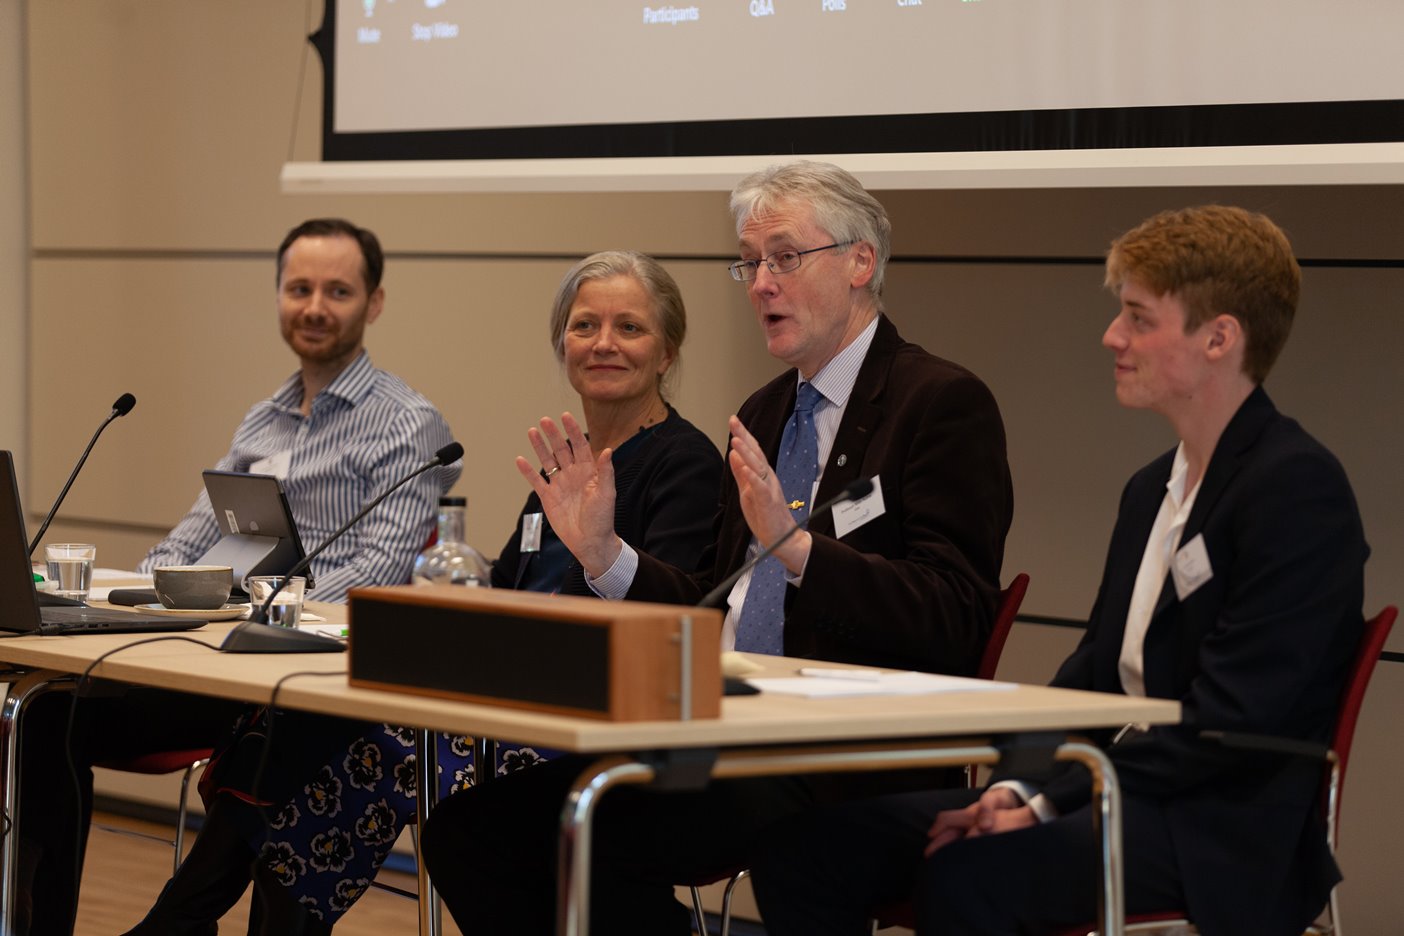 An image of the four in-person panelists. Professor Mike Hulme is speaking